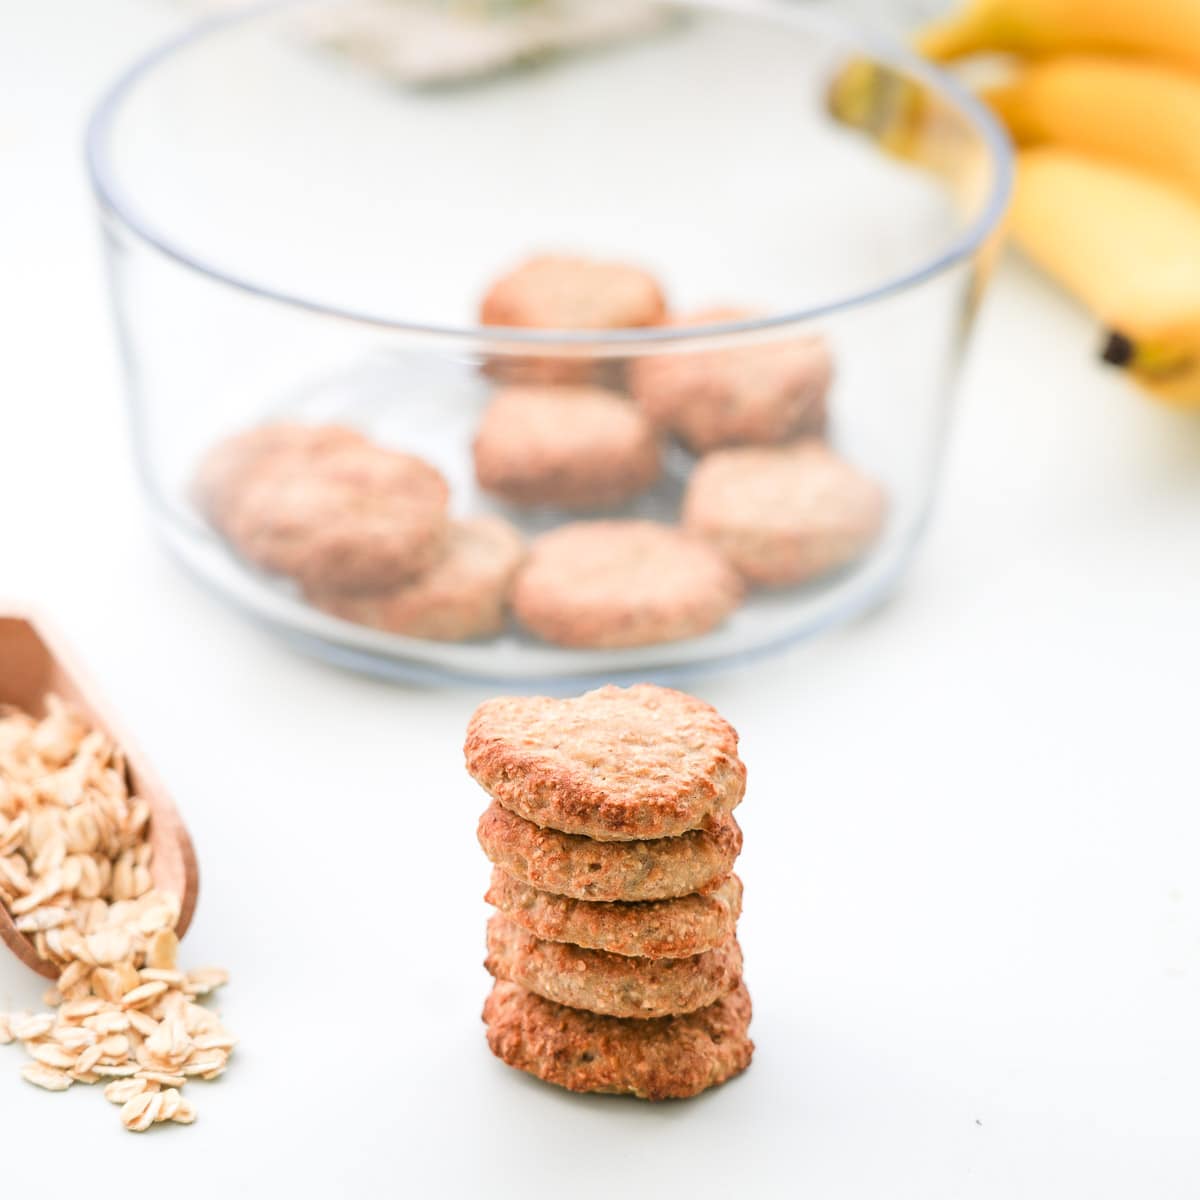 A tower of five small oatmeal cookies on a bench in-front of a container of cookies.